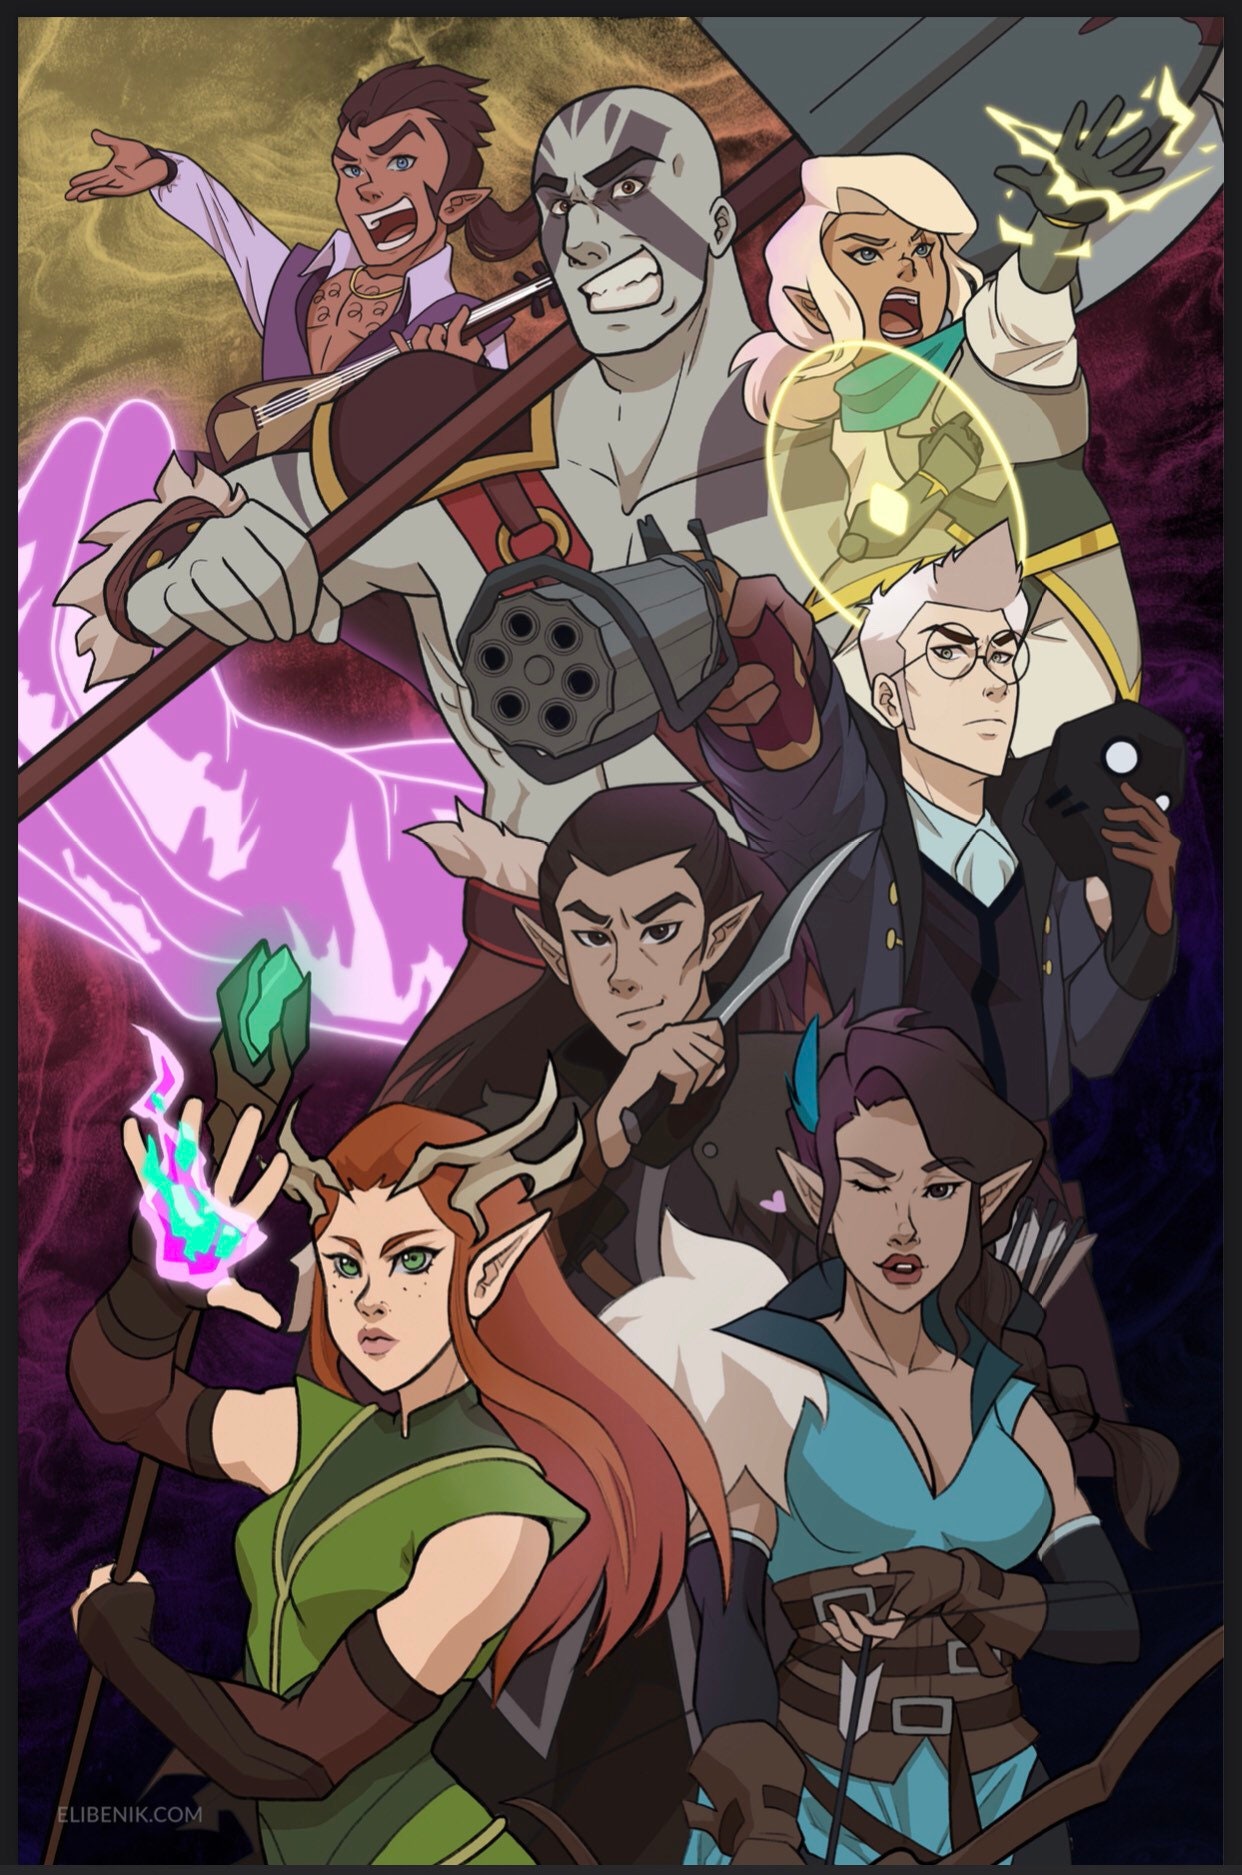 390 Critical Role- Vox Machina characters ideas  critical role, vox machina,  critical role fan art